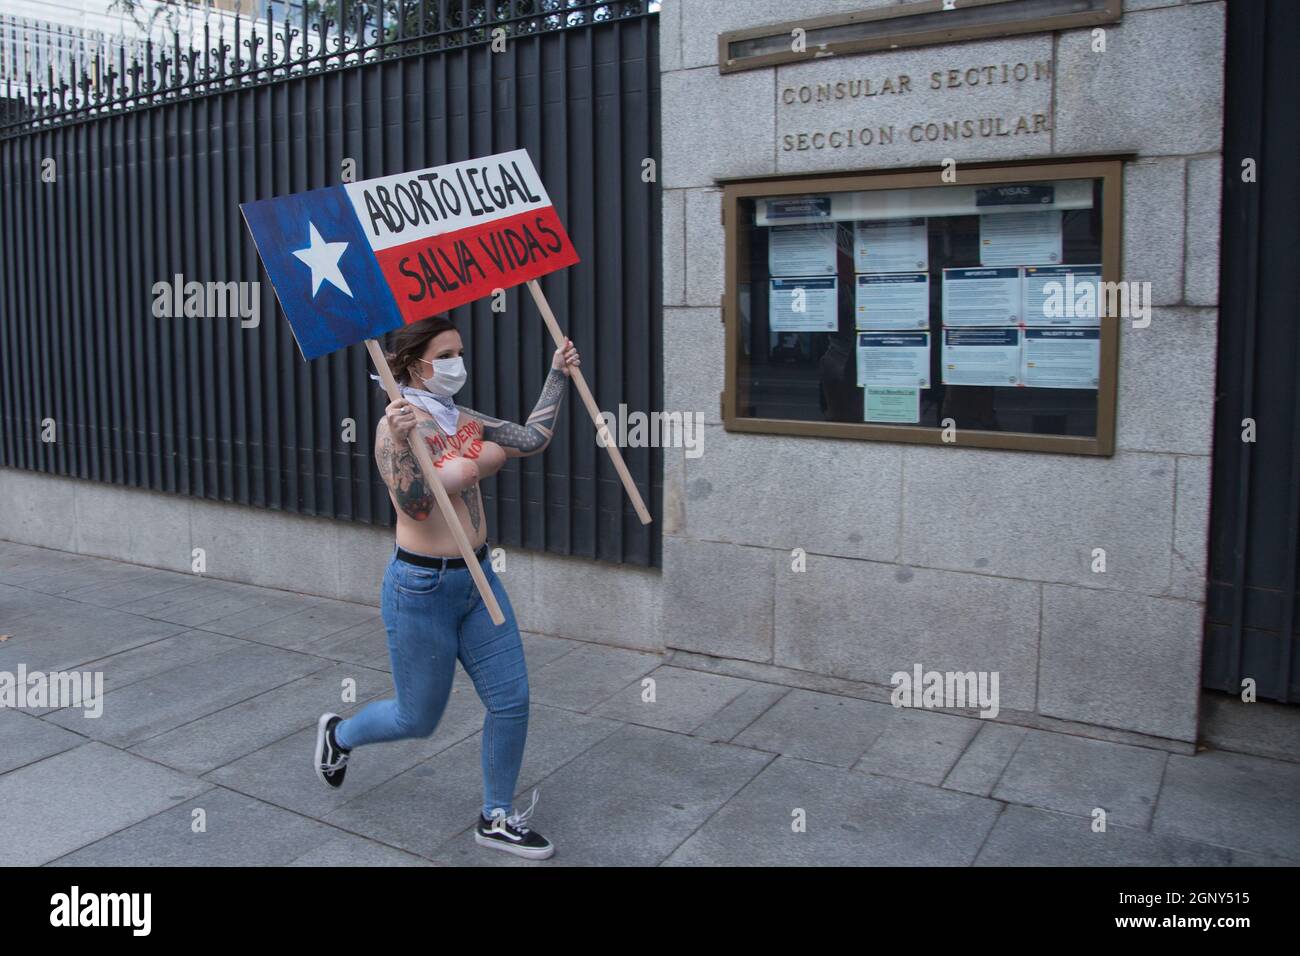 Madrid, Spain. 28th Sep, 2021. A FEMEN Activists arrives at the protest for abortion rights in Texas, USA at the doors of the Ameri embassy (Photo by Fer Capdepon Arroyo/Pacific Press) Credit: Pacific Press Media Production Corp./Alamy Live News Stock Photo